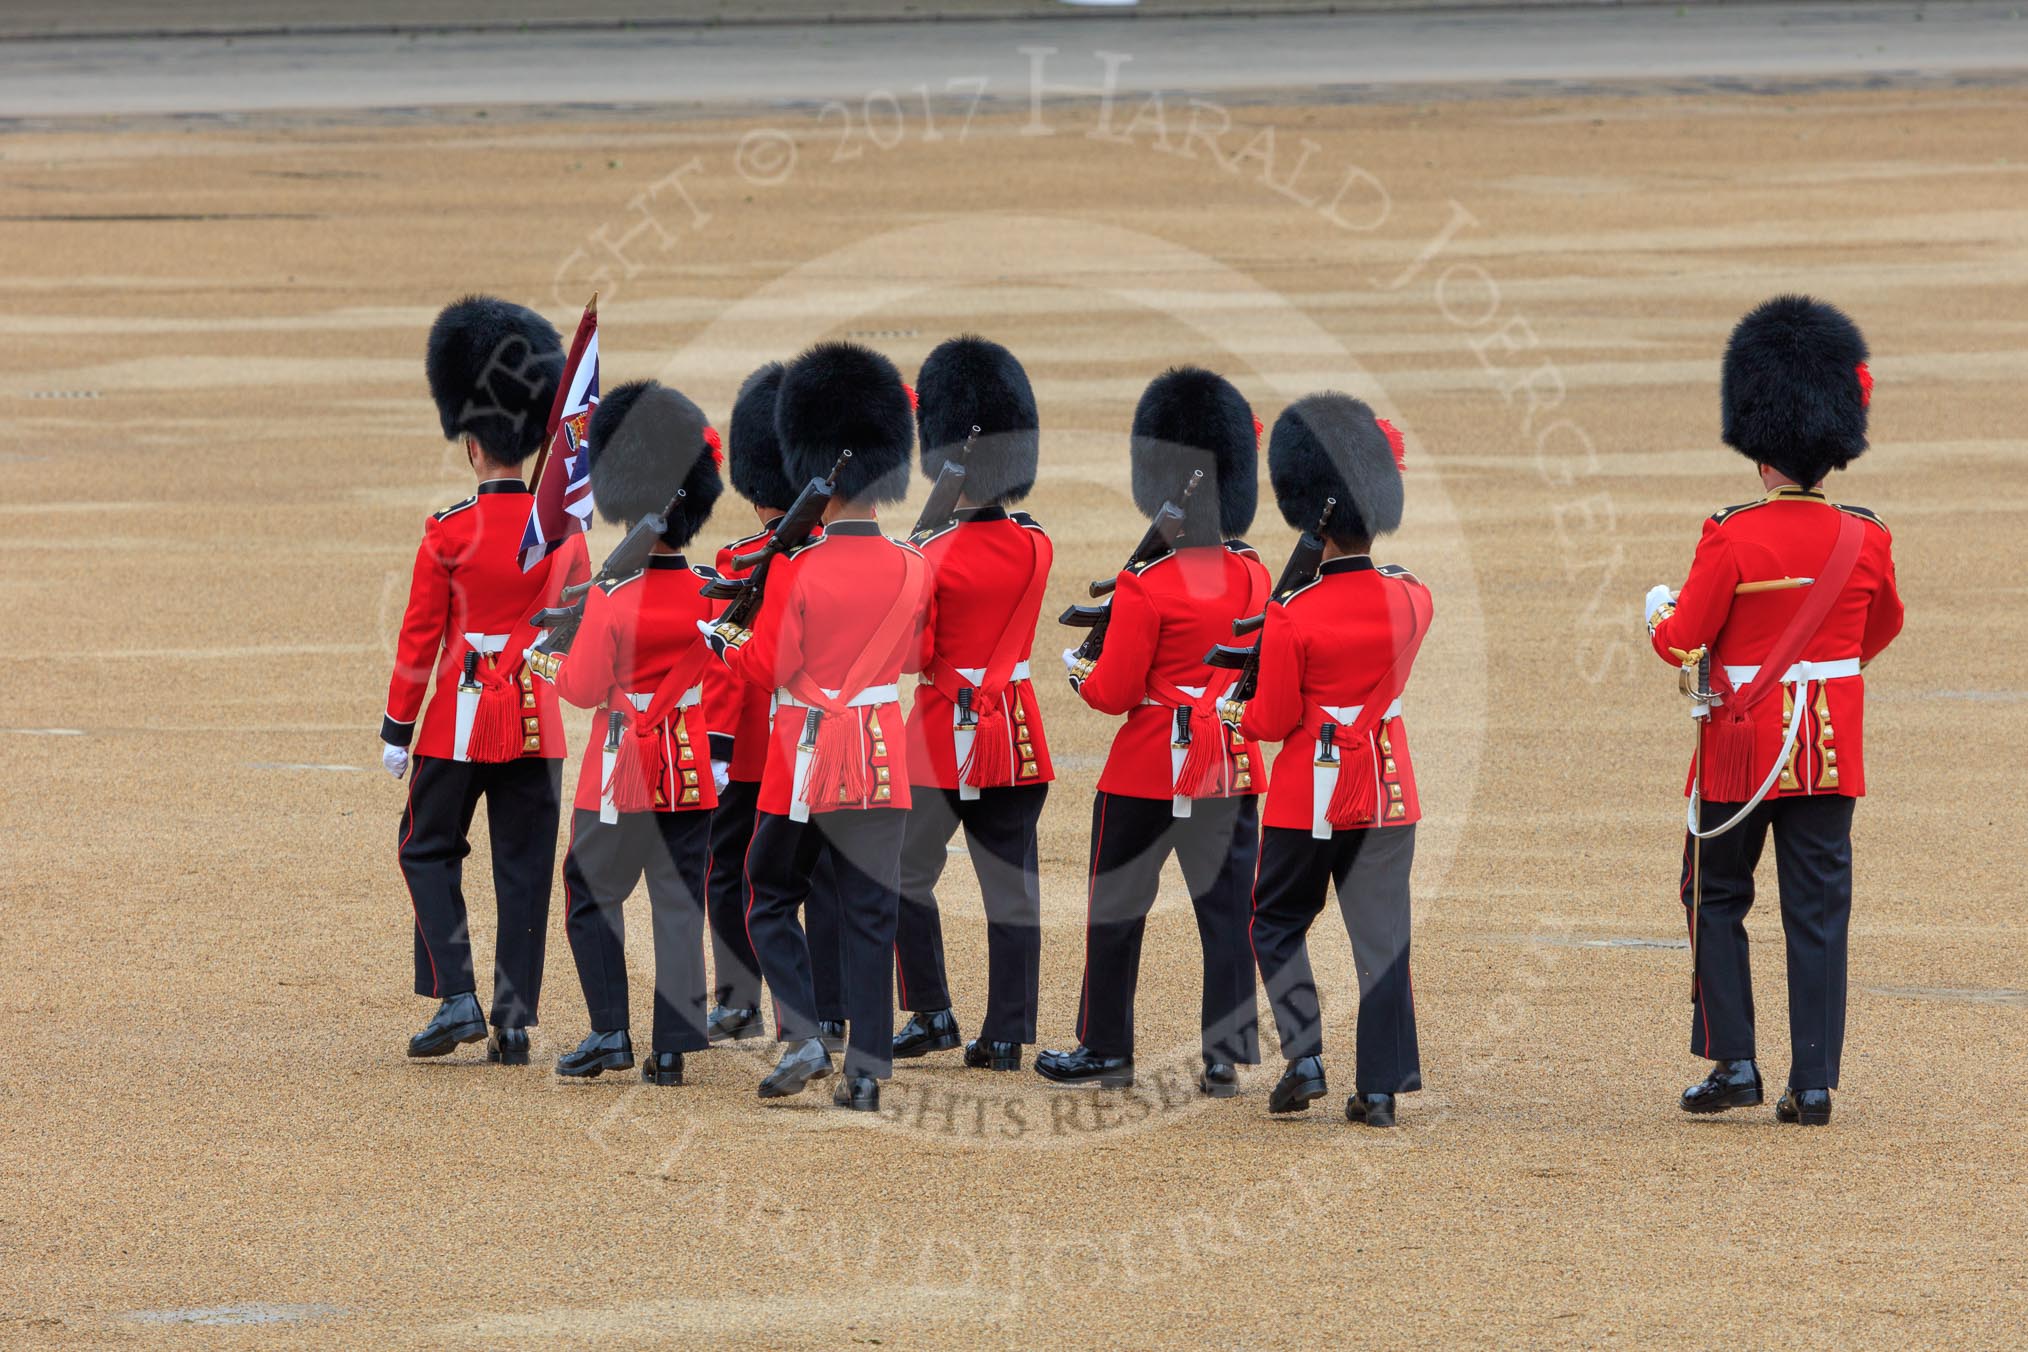 during The Colonel's Review {iptcyear4} (final rehearsal for Trooping the Colour, The Queen's Birthday Parade)  at Horse Guards Parade, Westminster, London, 2 June 2018, 10:16.